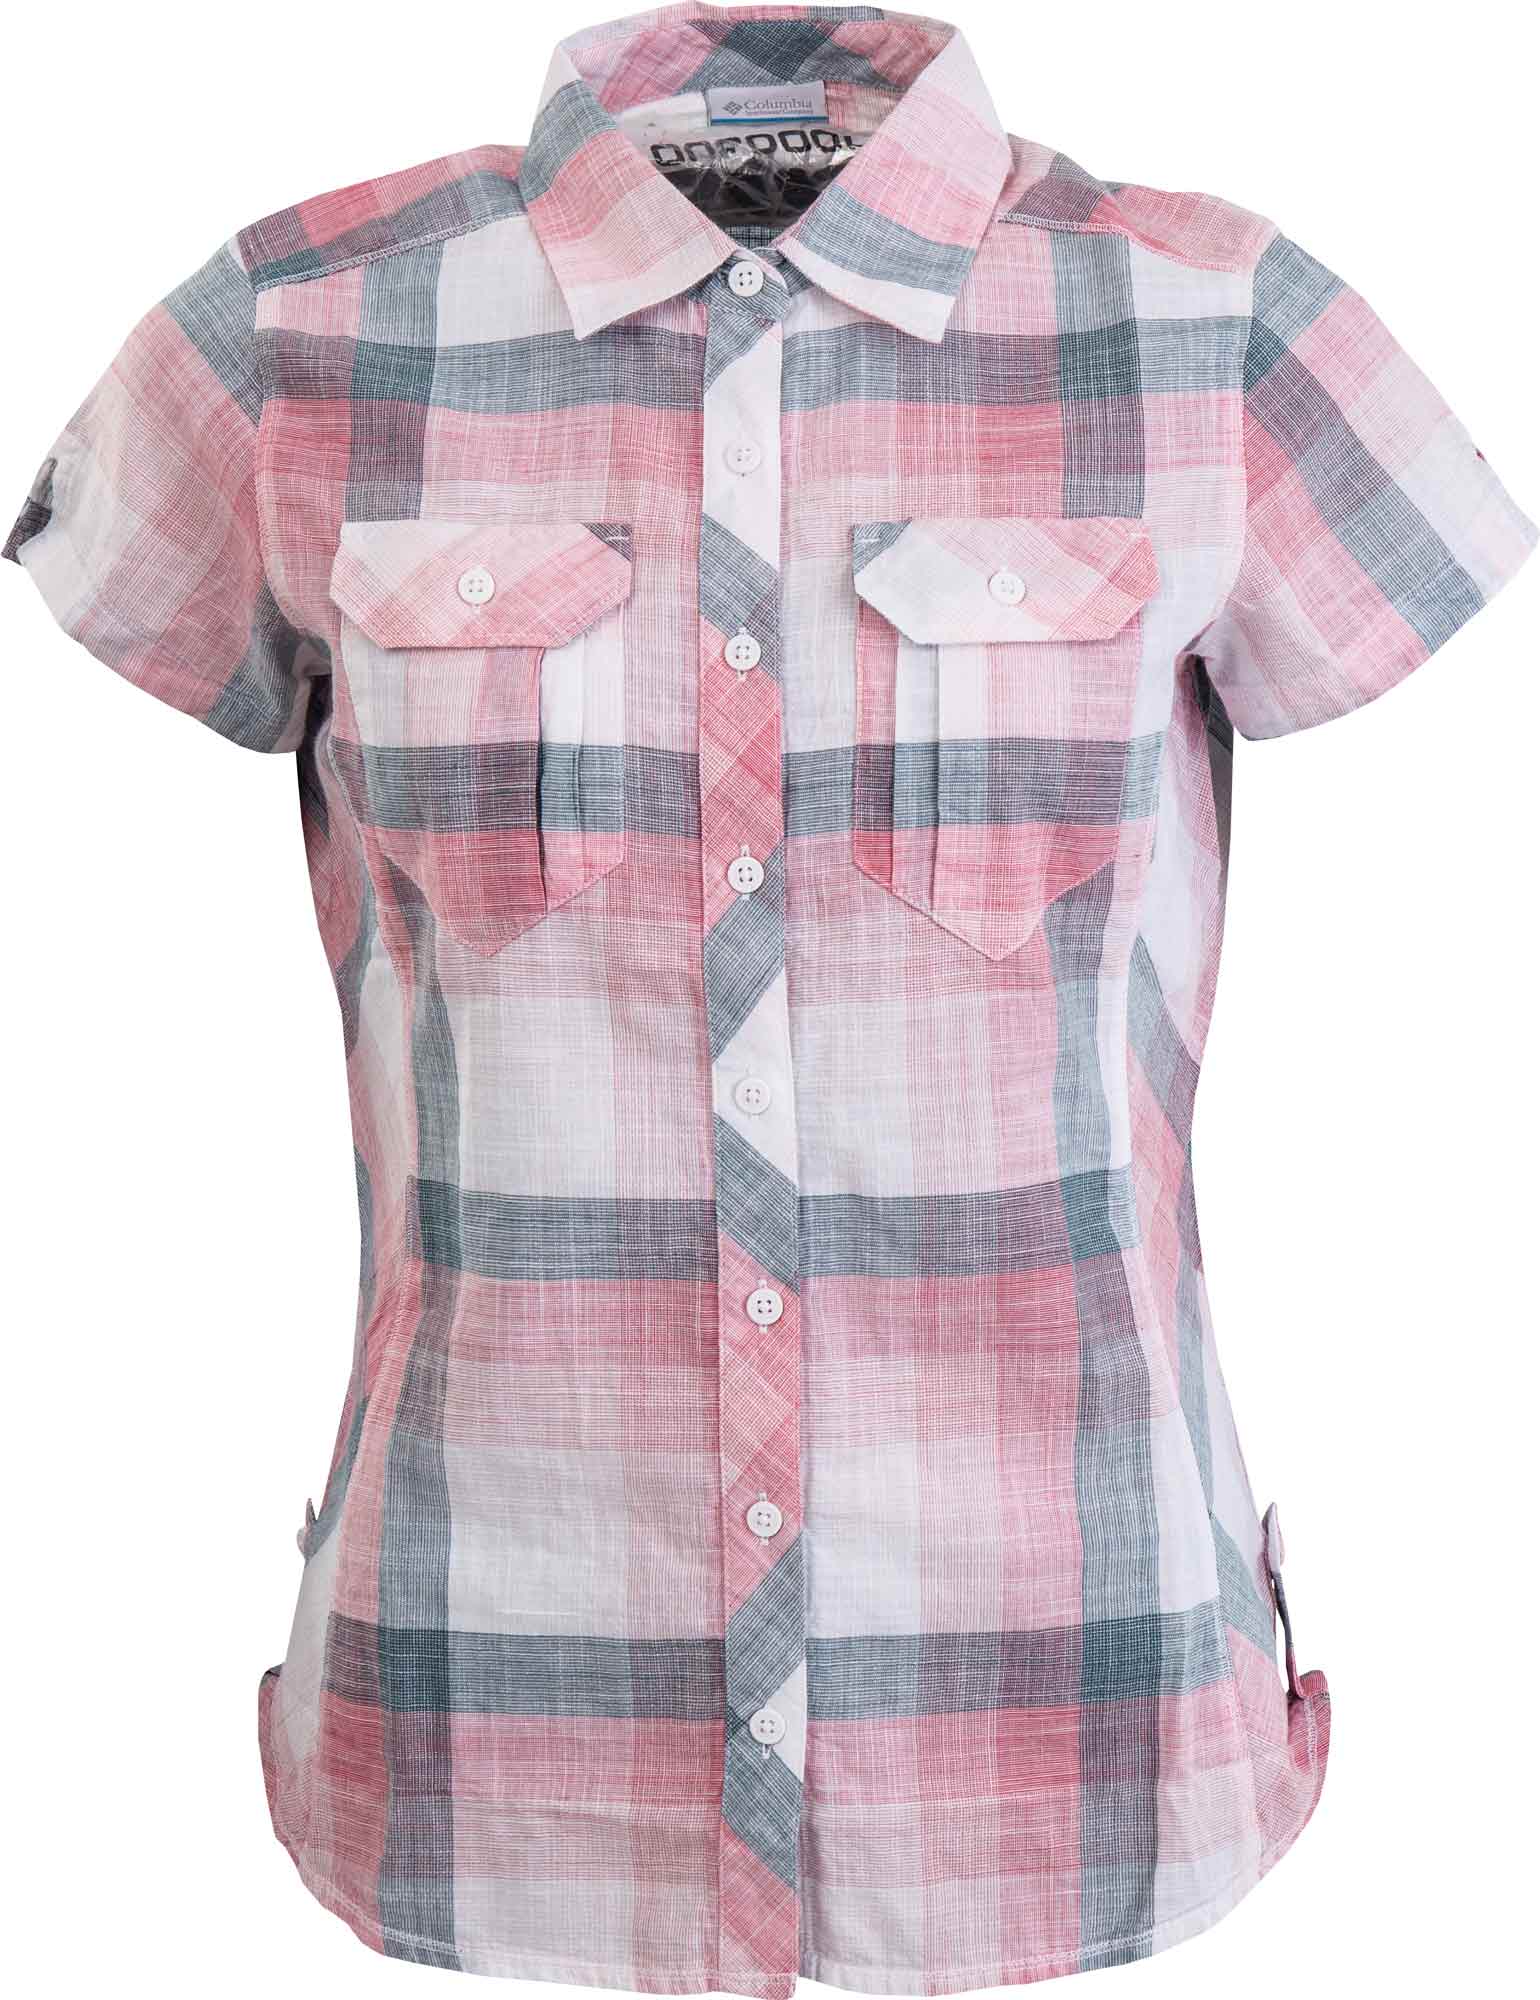 Women's shirt with short sleeves